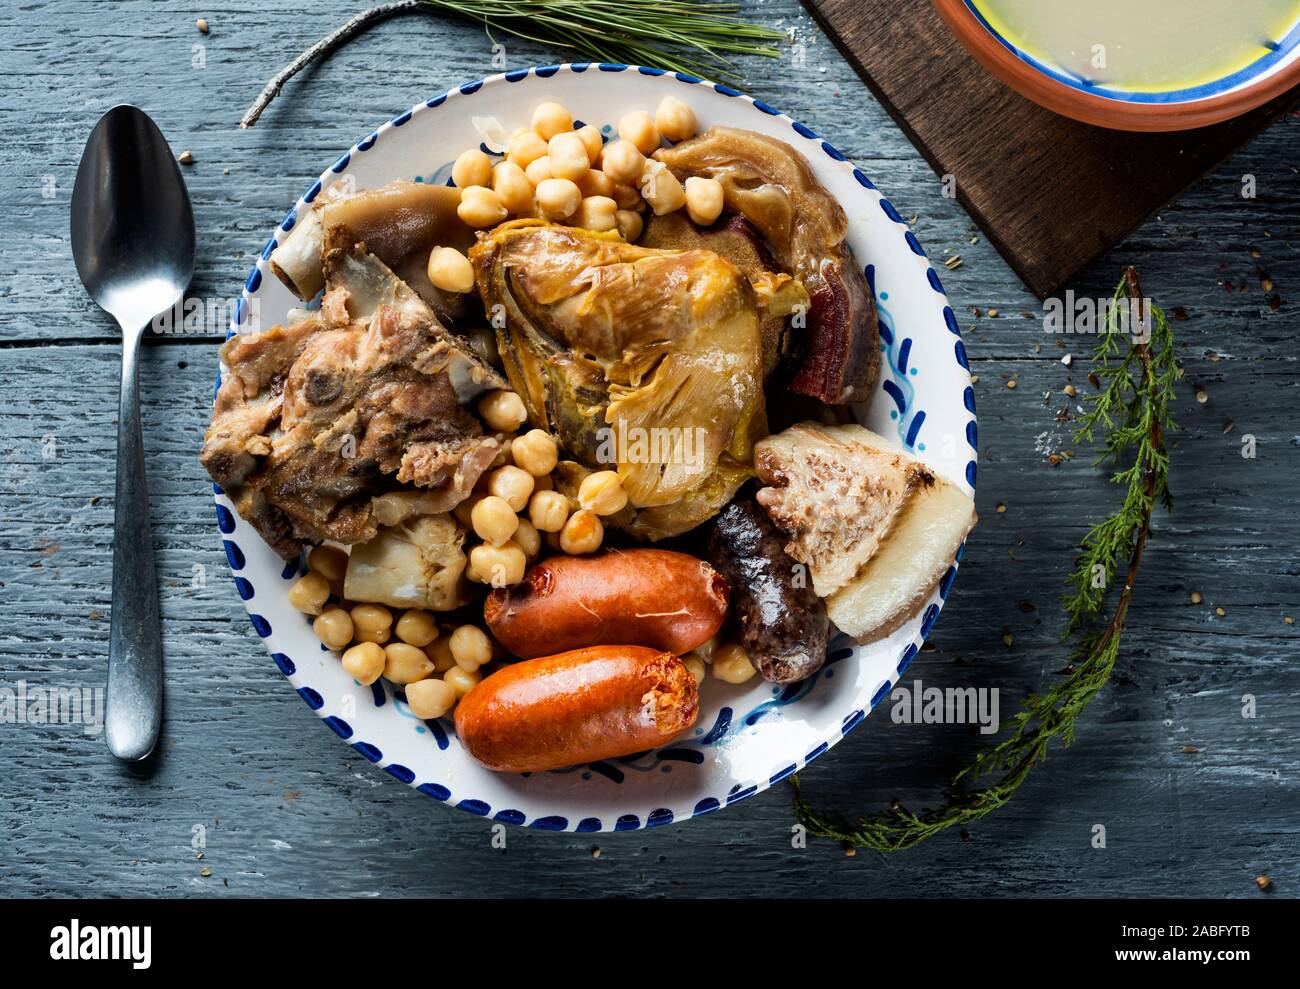 cocido madrileno, typical of Madrid, Spain, with the soup served in an earthenware bowl and the meat and vegetables used in the broth served in a tray Stock Photo